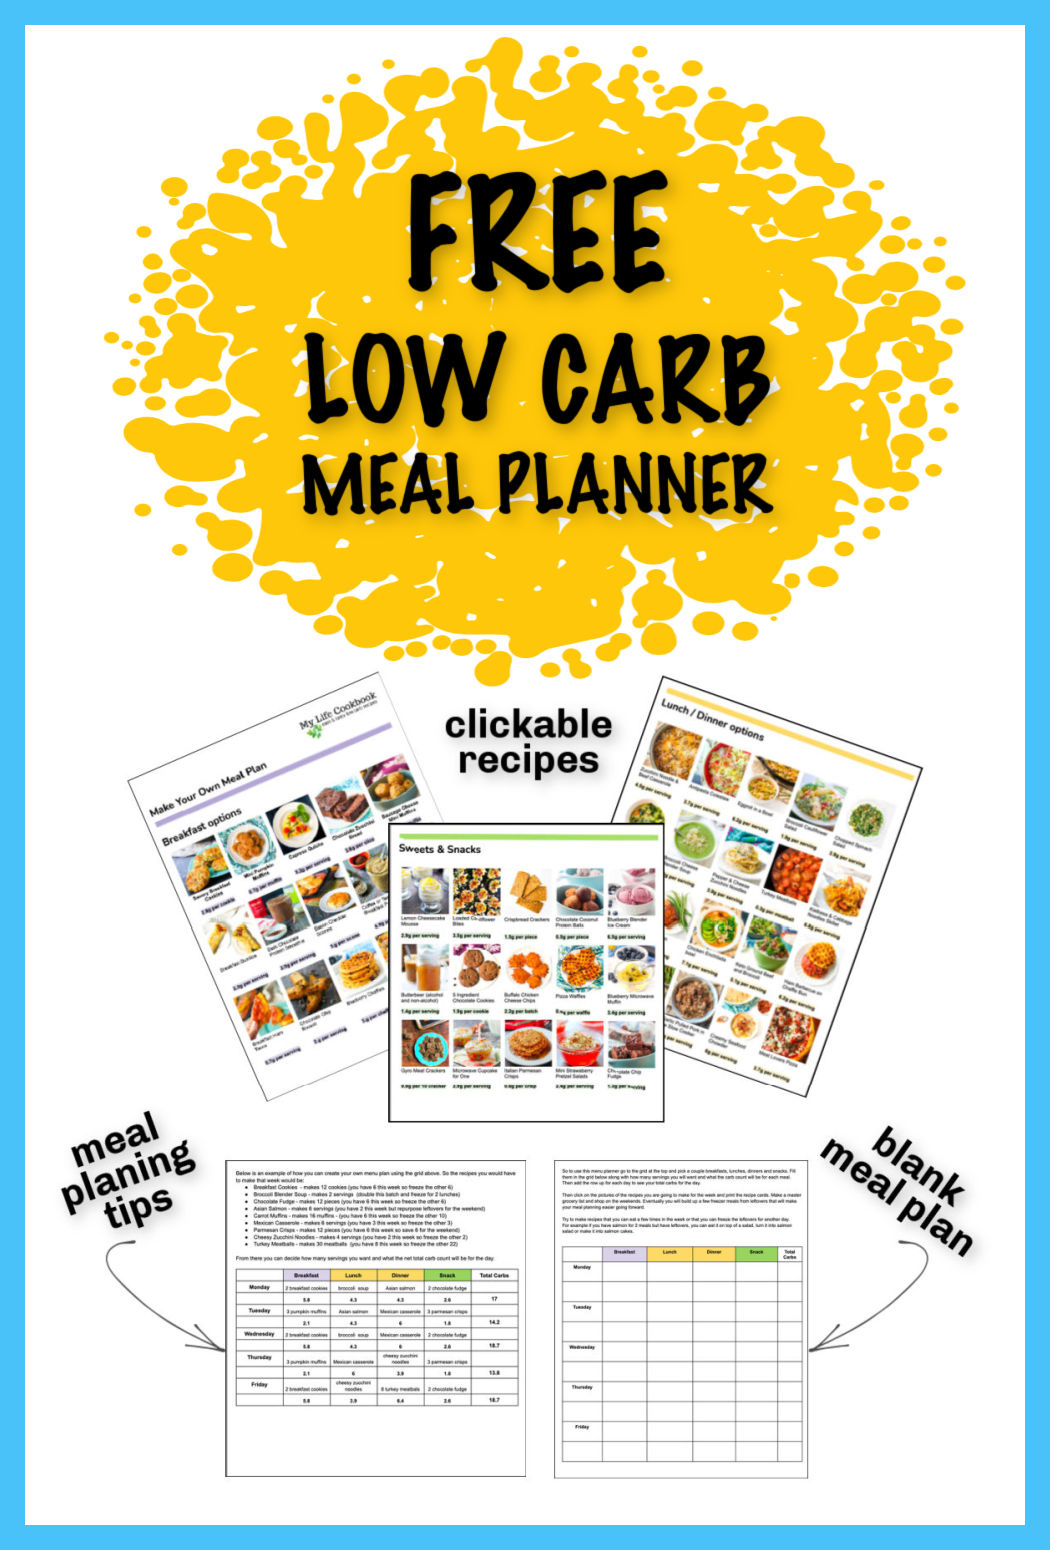 graphic showing free low carb meal planner and text